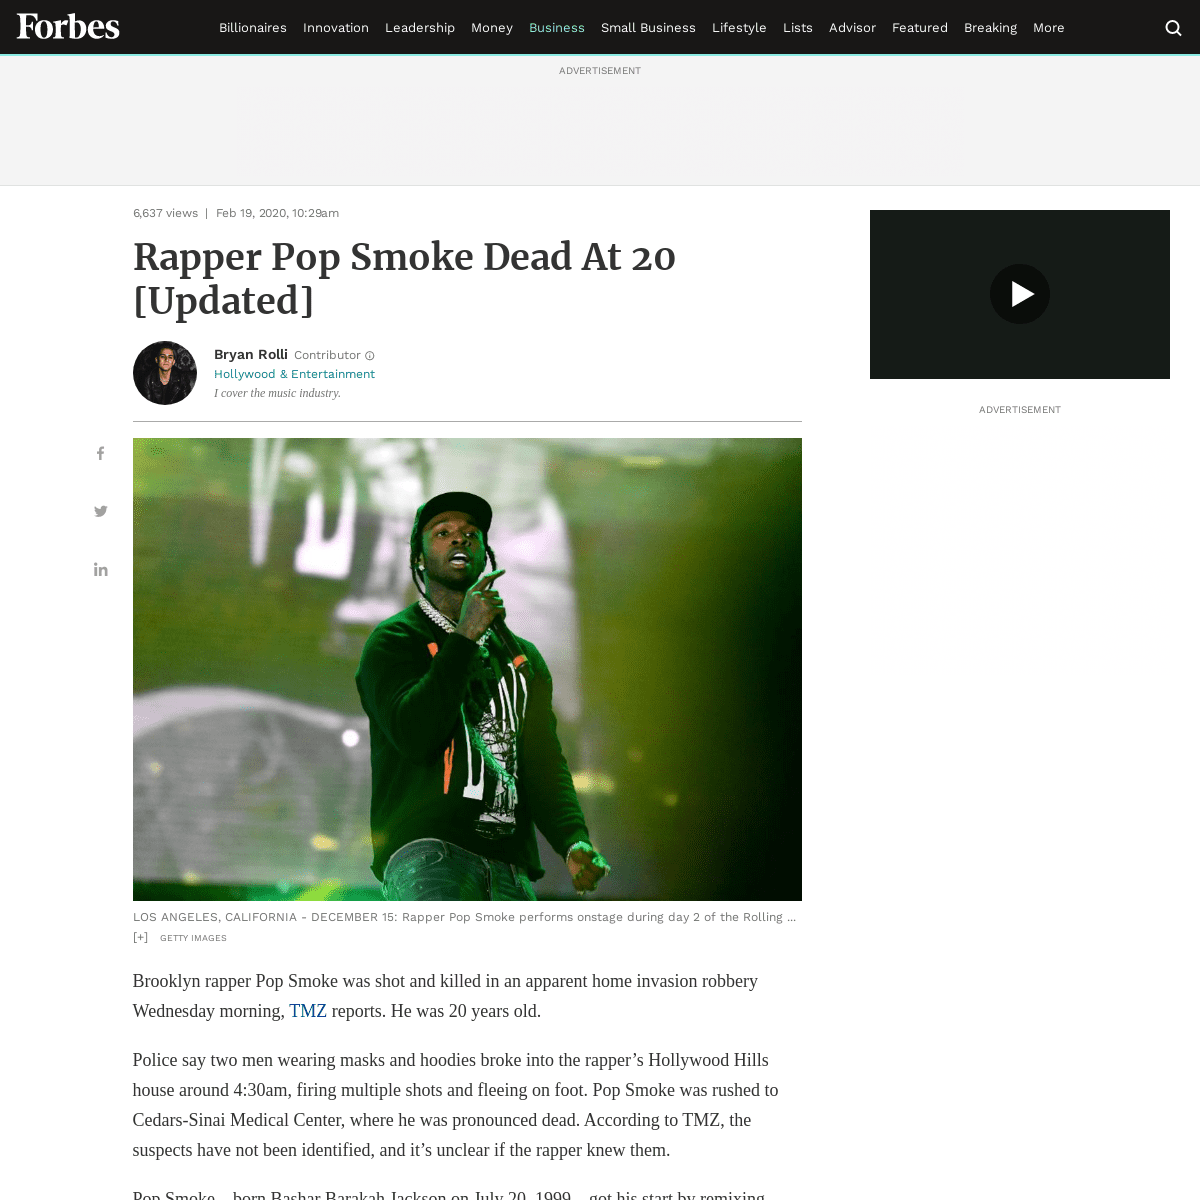 A complete backup of www.forbes.com/sites/bryanrolli/2020/02/19/rapper-pop-smoke-dead-at-20-report/